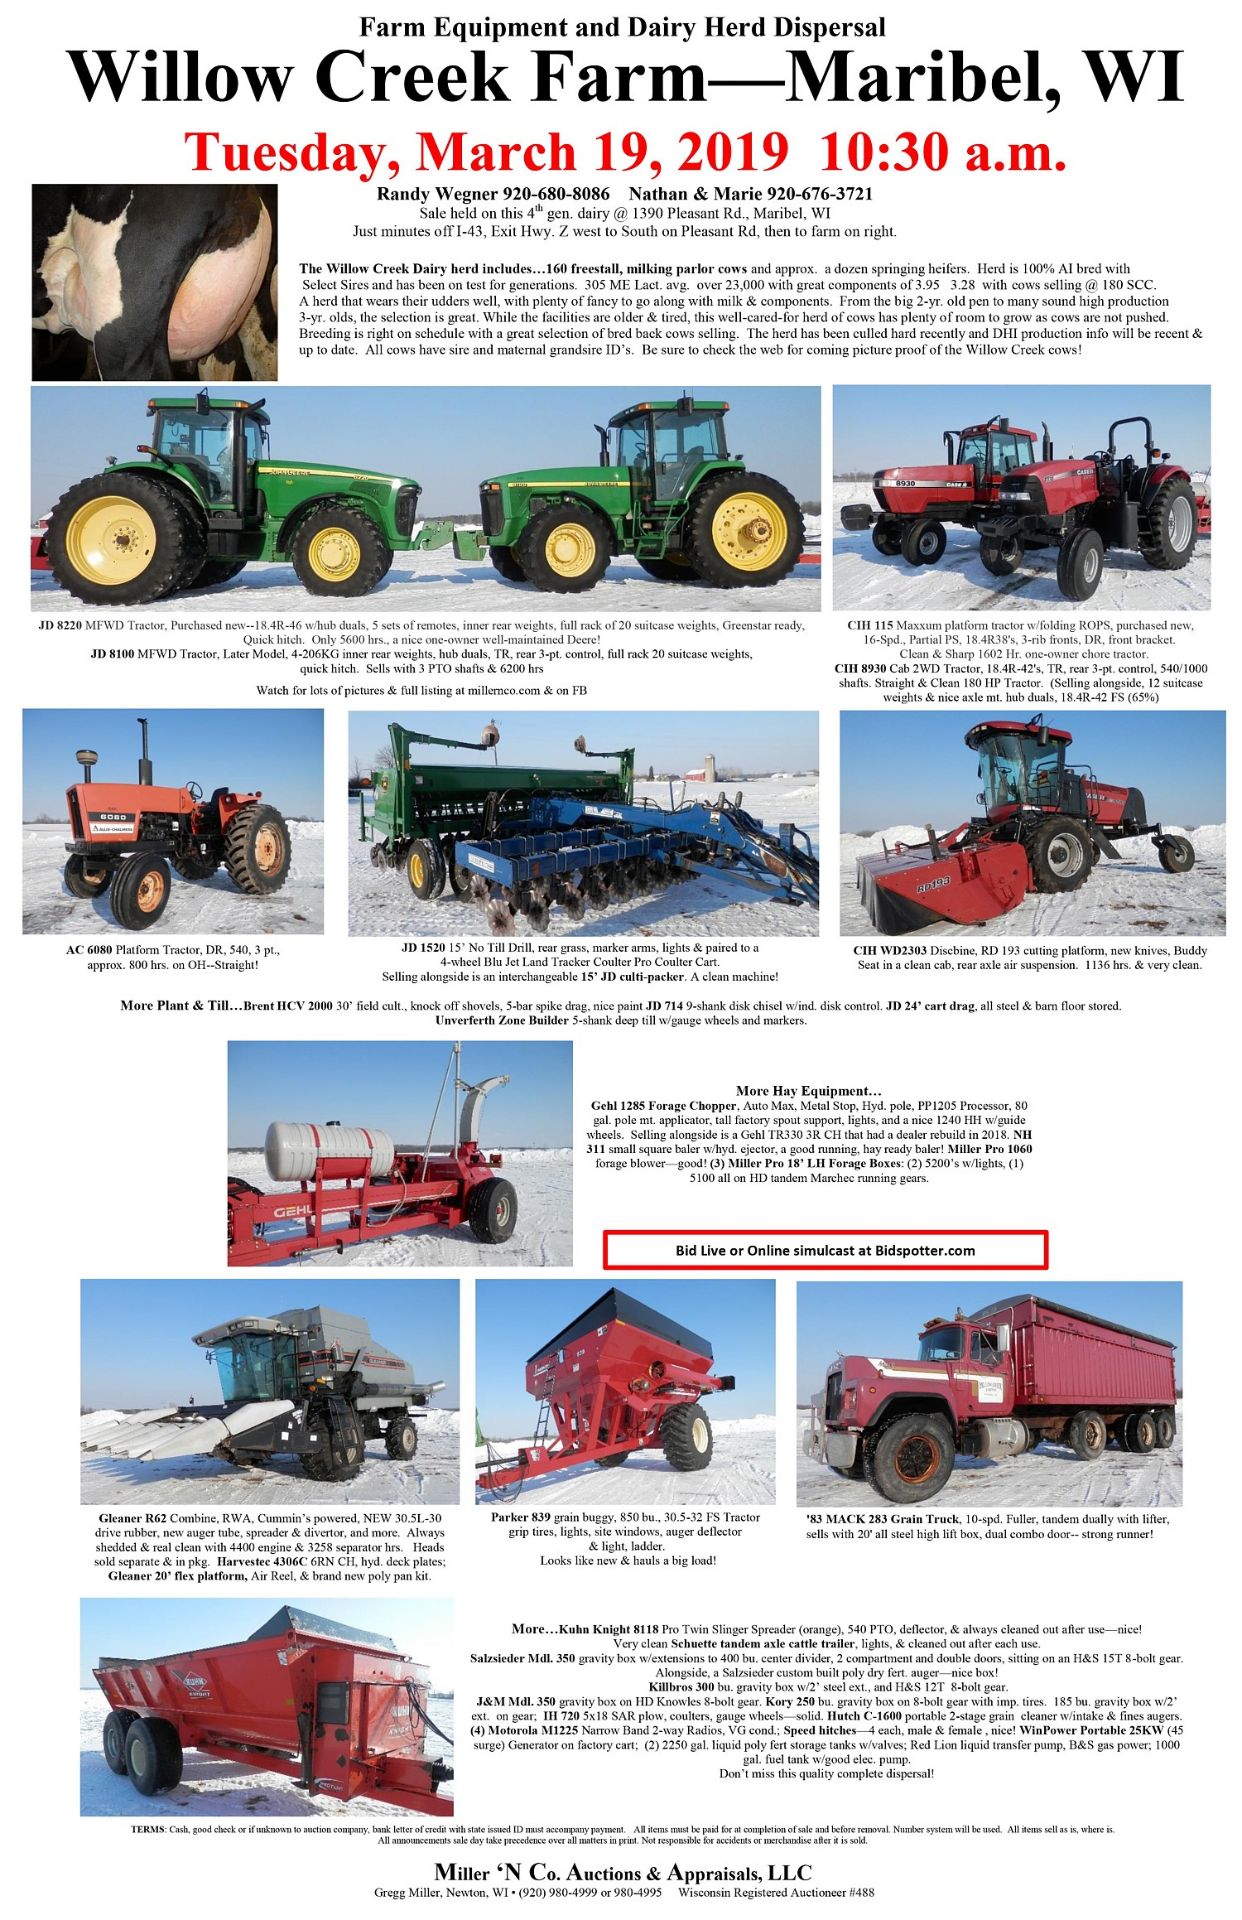 CLICK HERE FOR PREVIEW - Complete Dairy Herd & Farm Equipment Dispersal